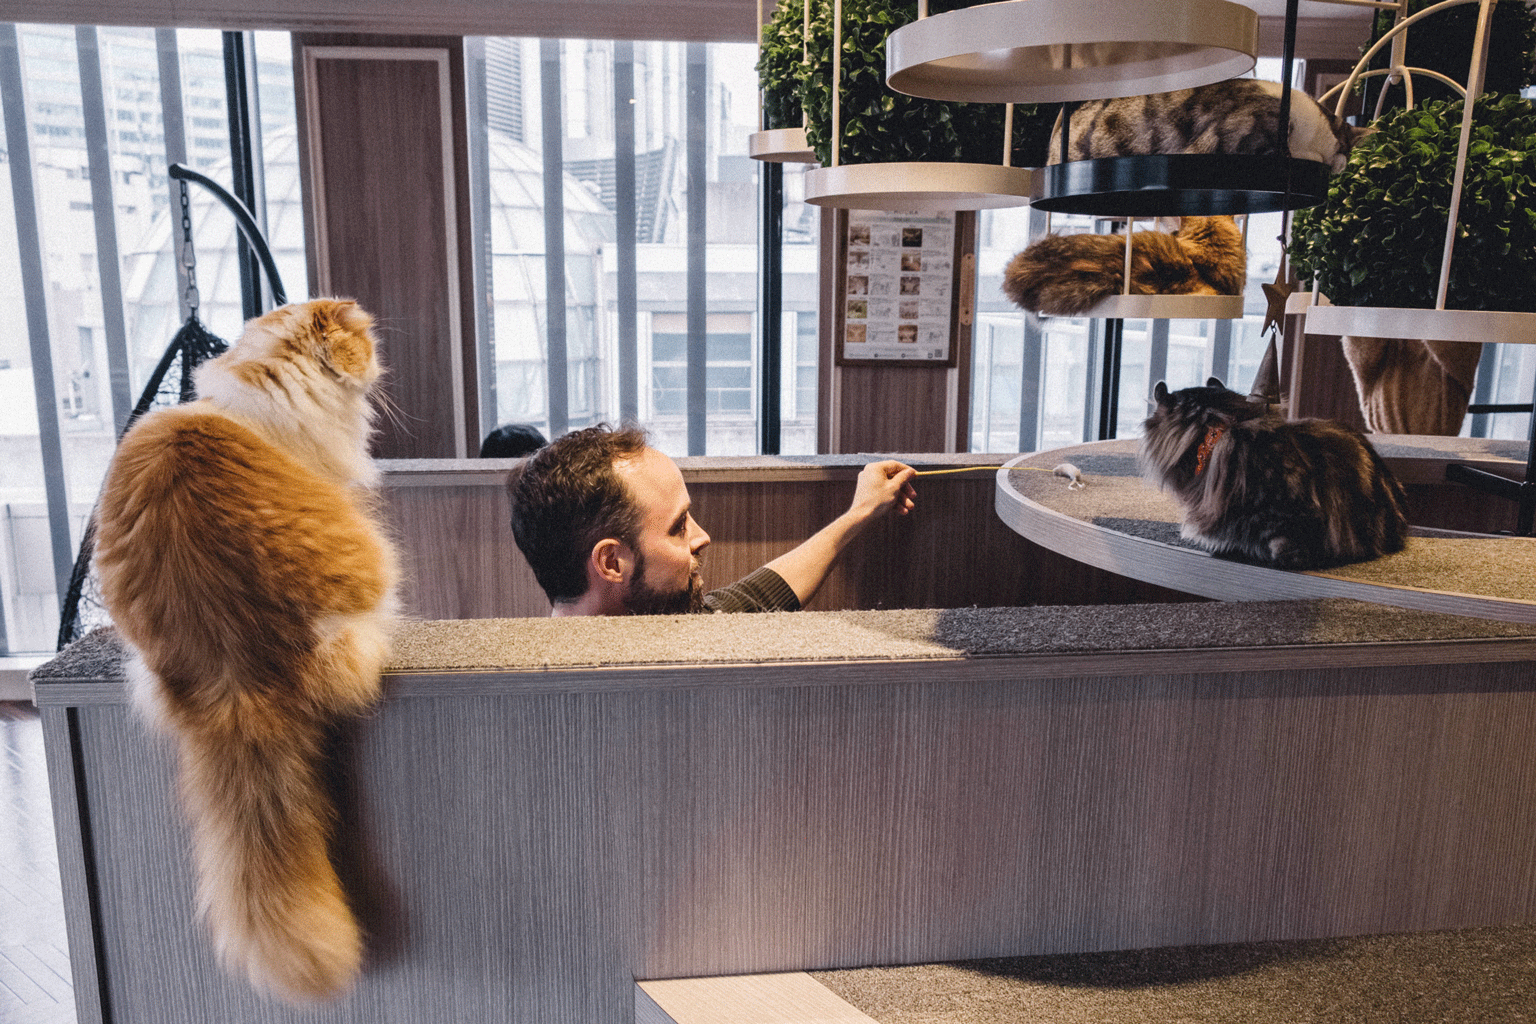 Scenes from a Tokyo Cat Cafe - She's So Bright, Cats, Kitties, Tokyo, Persian, Cute, Aww, Adorable, Animals, Kittens, GIF